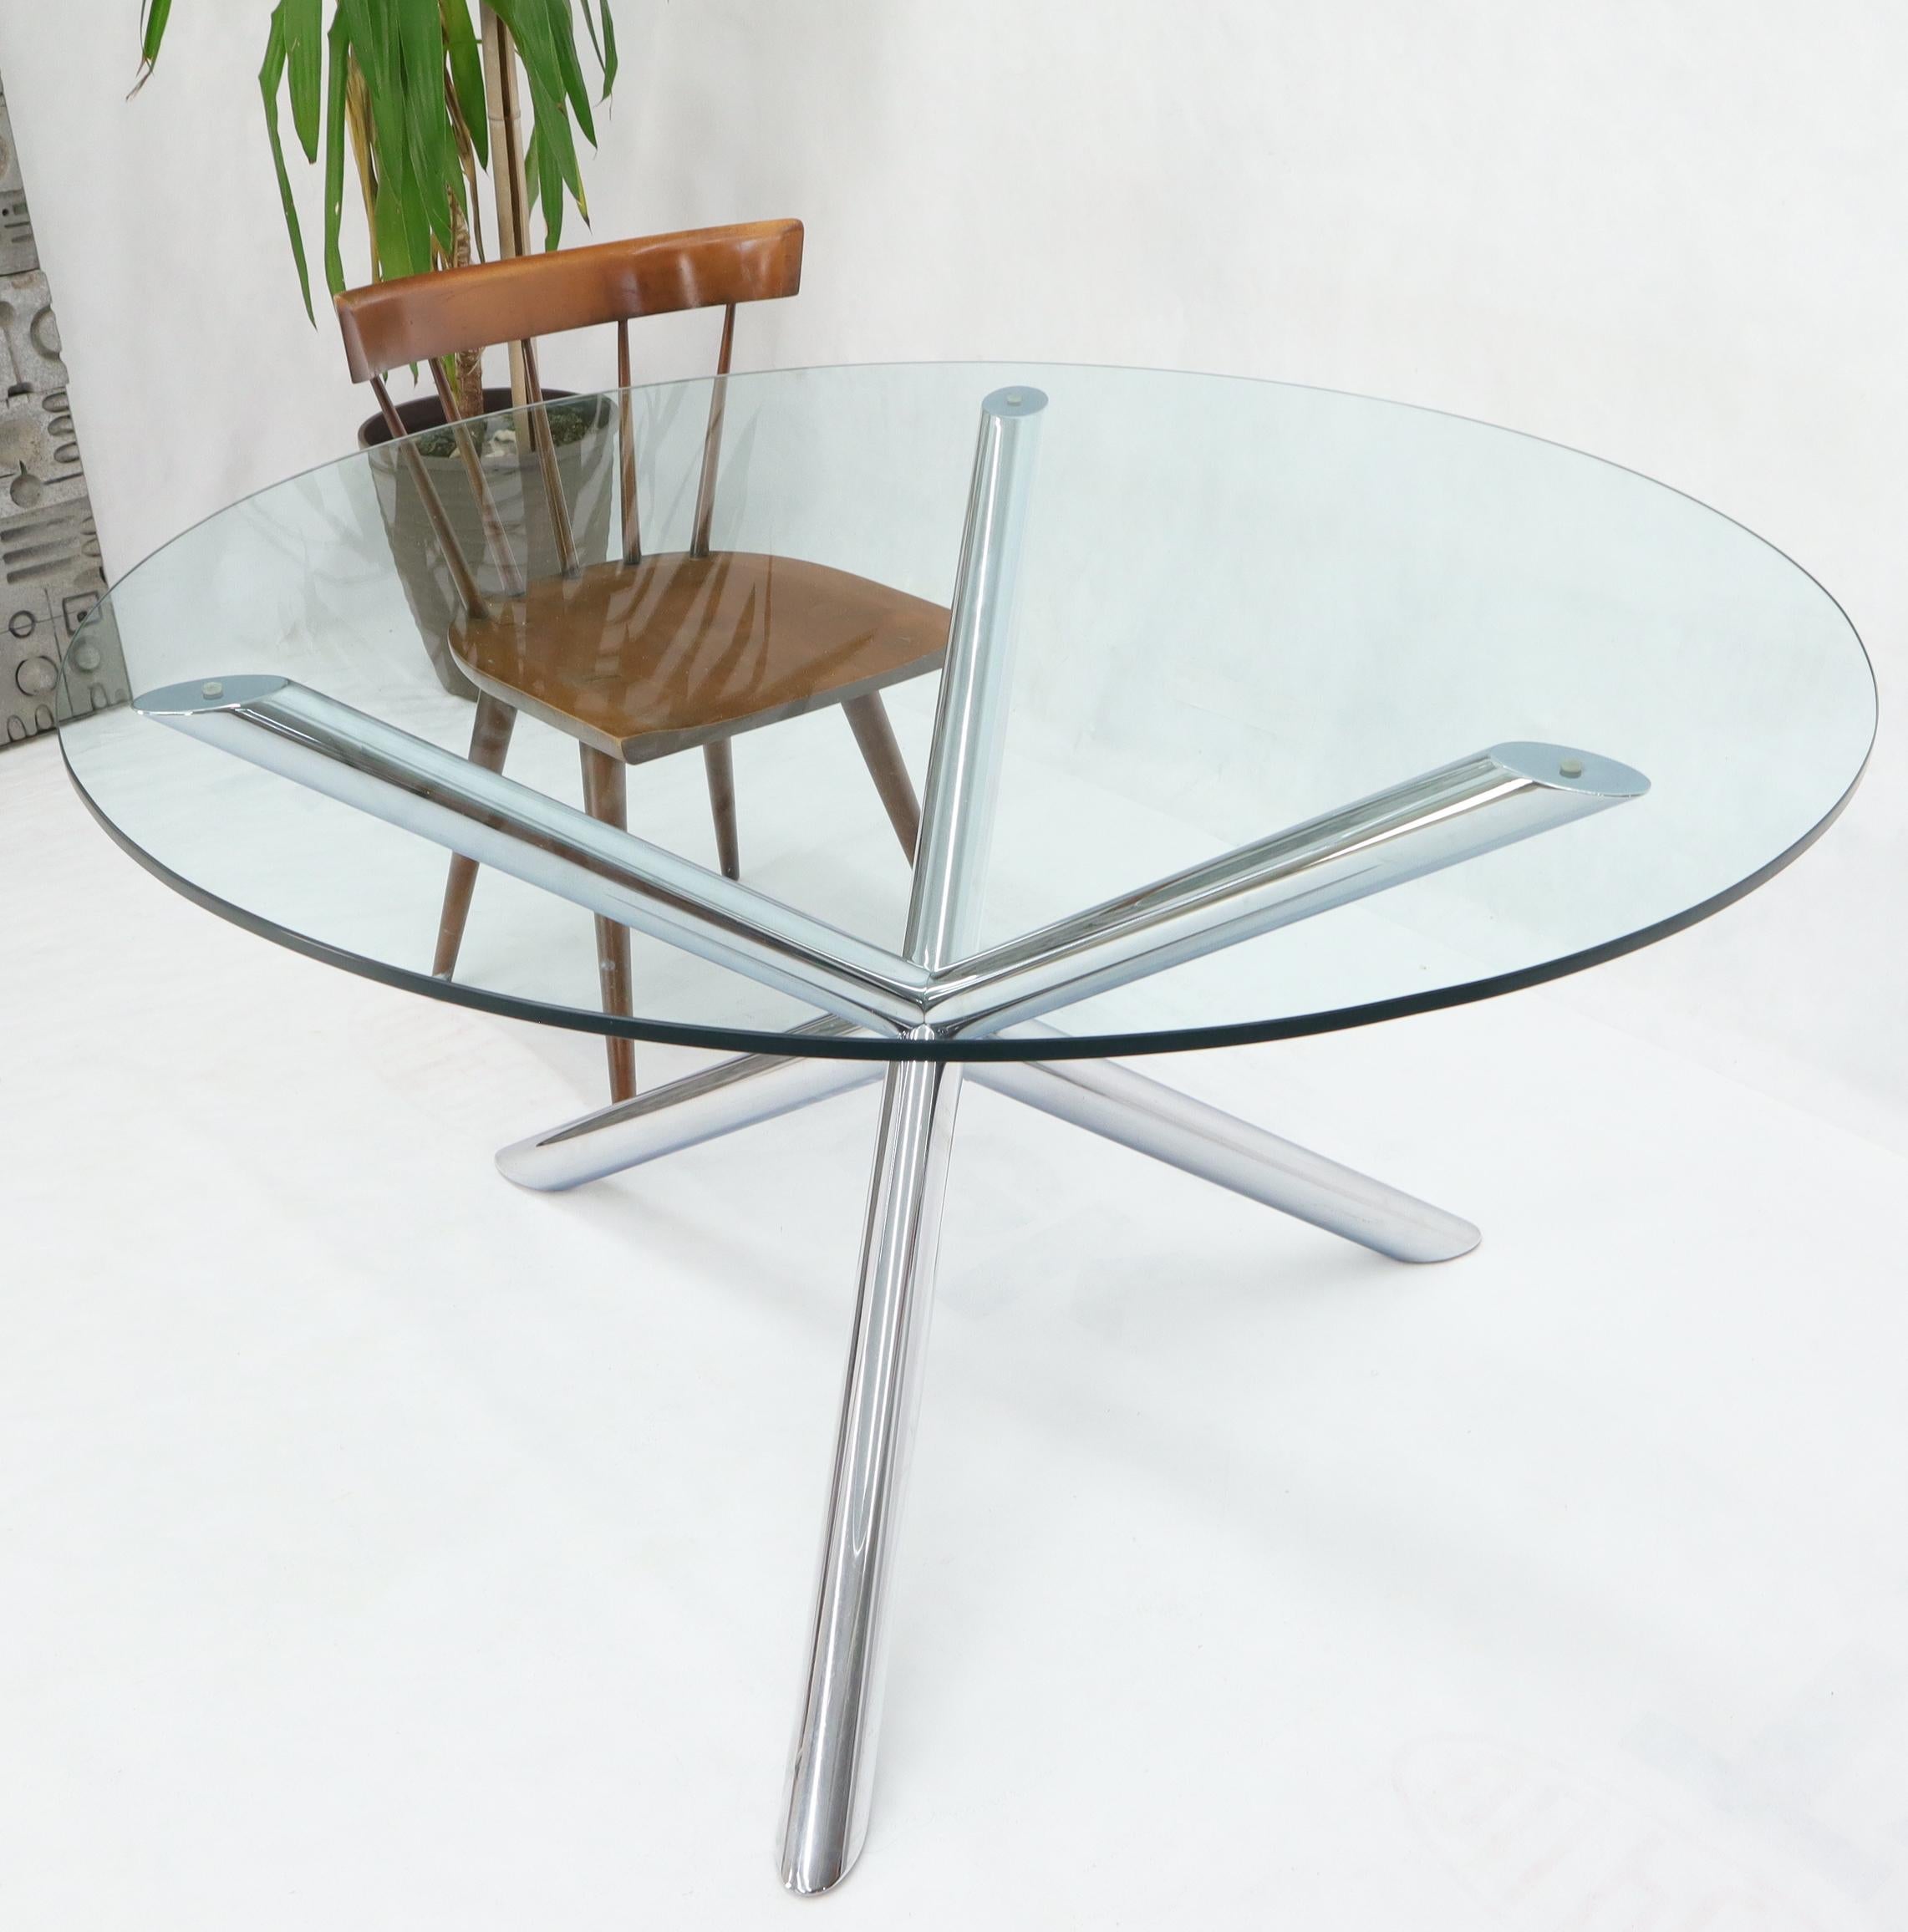 20th Century Jack Shape Large Polished Chrome Round Glass Top Dining Table For Sale